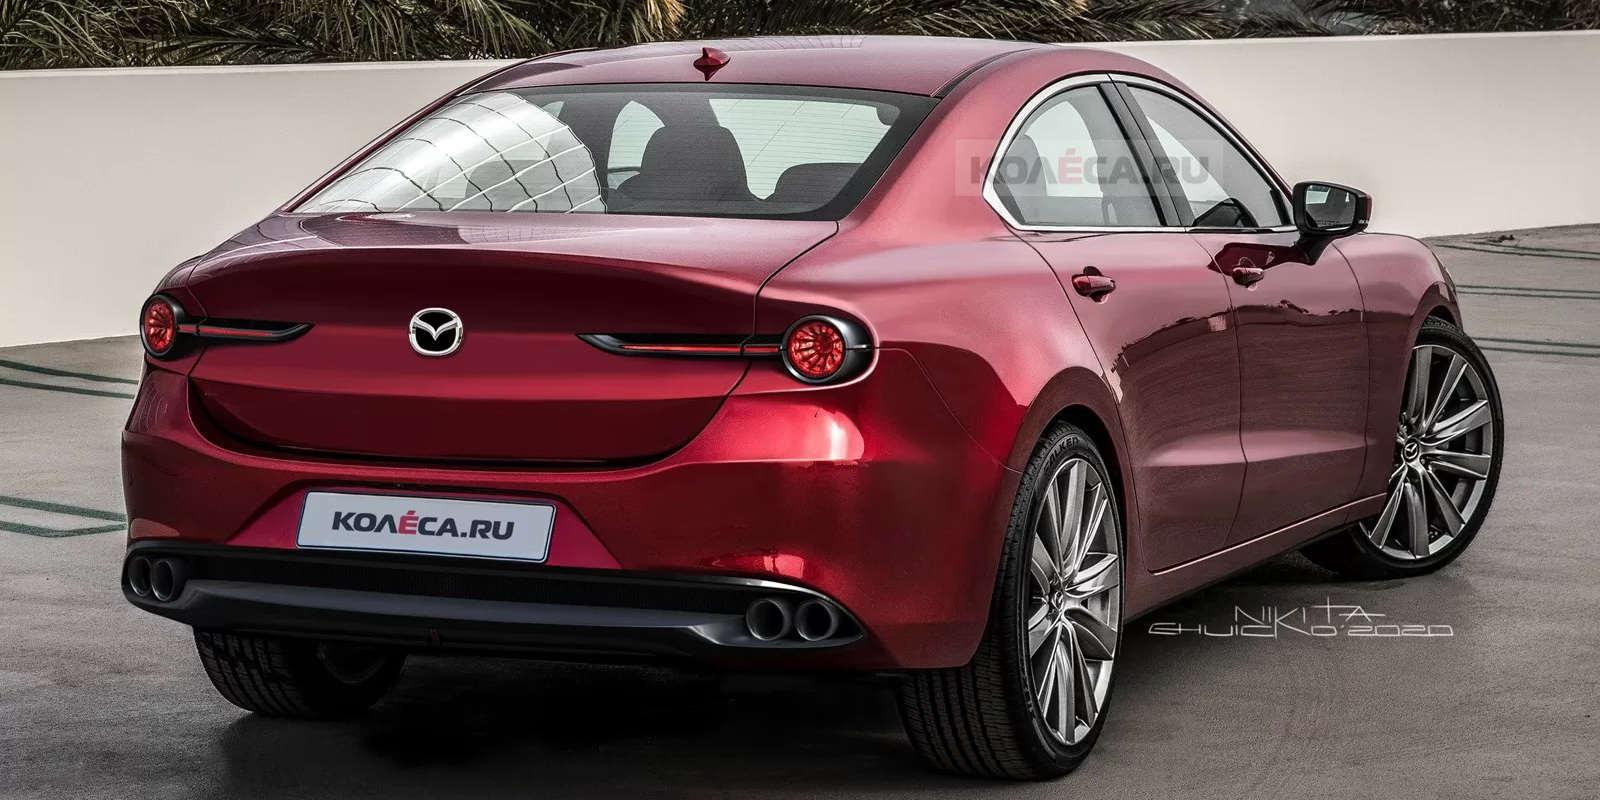 2023 Mazda6 RWD Should Resemble The Vision Concept, So Here's A